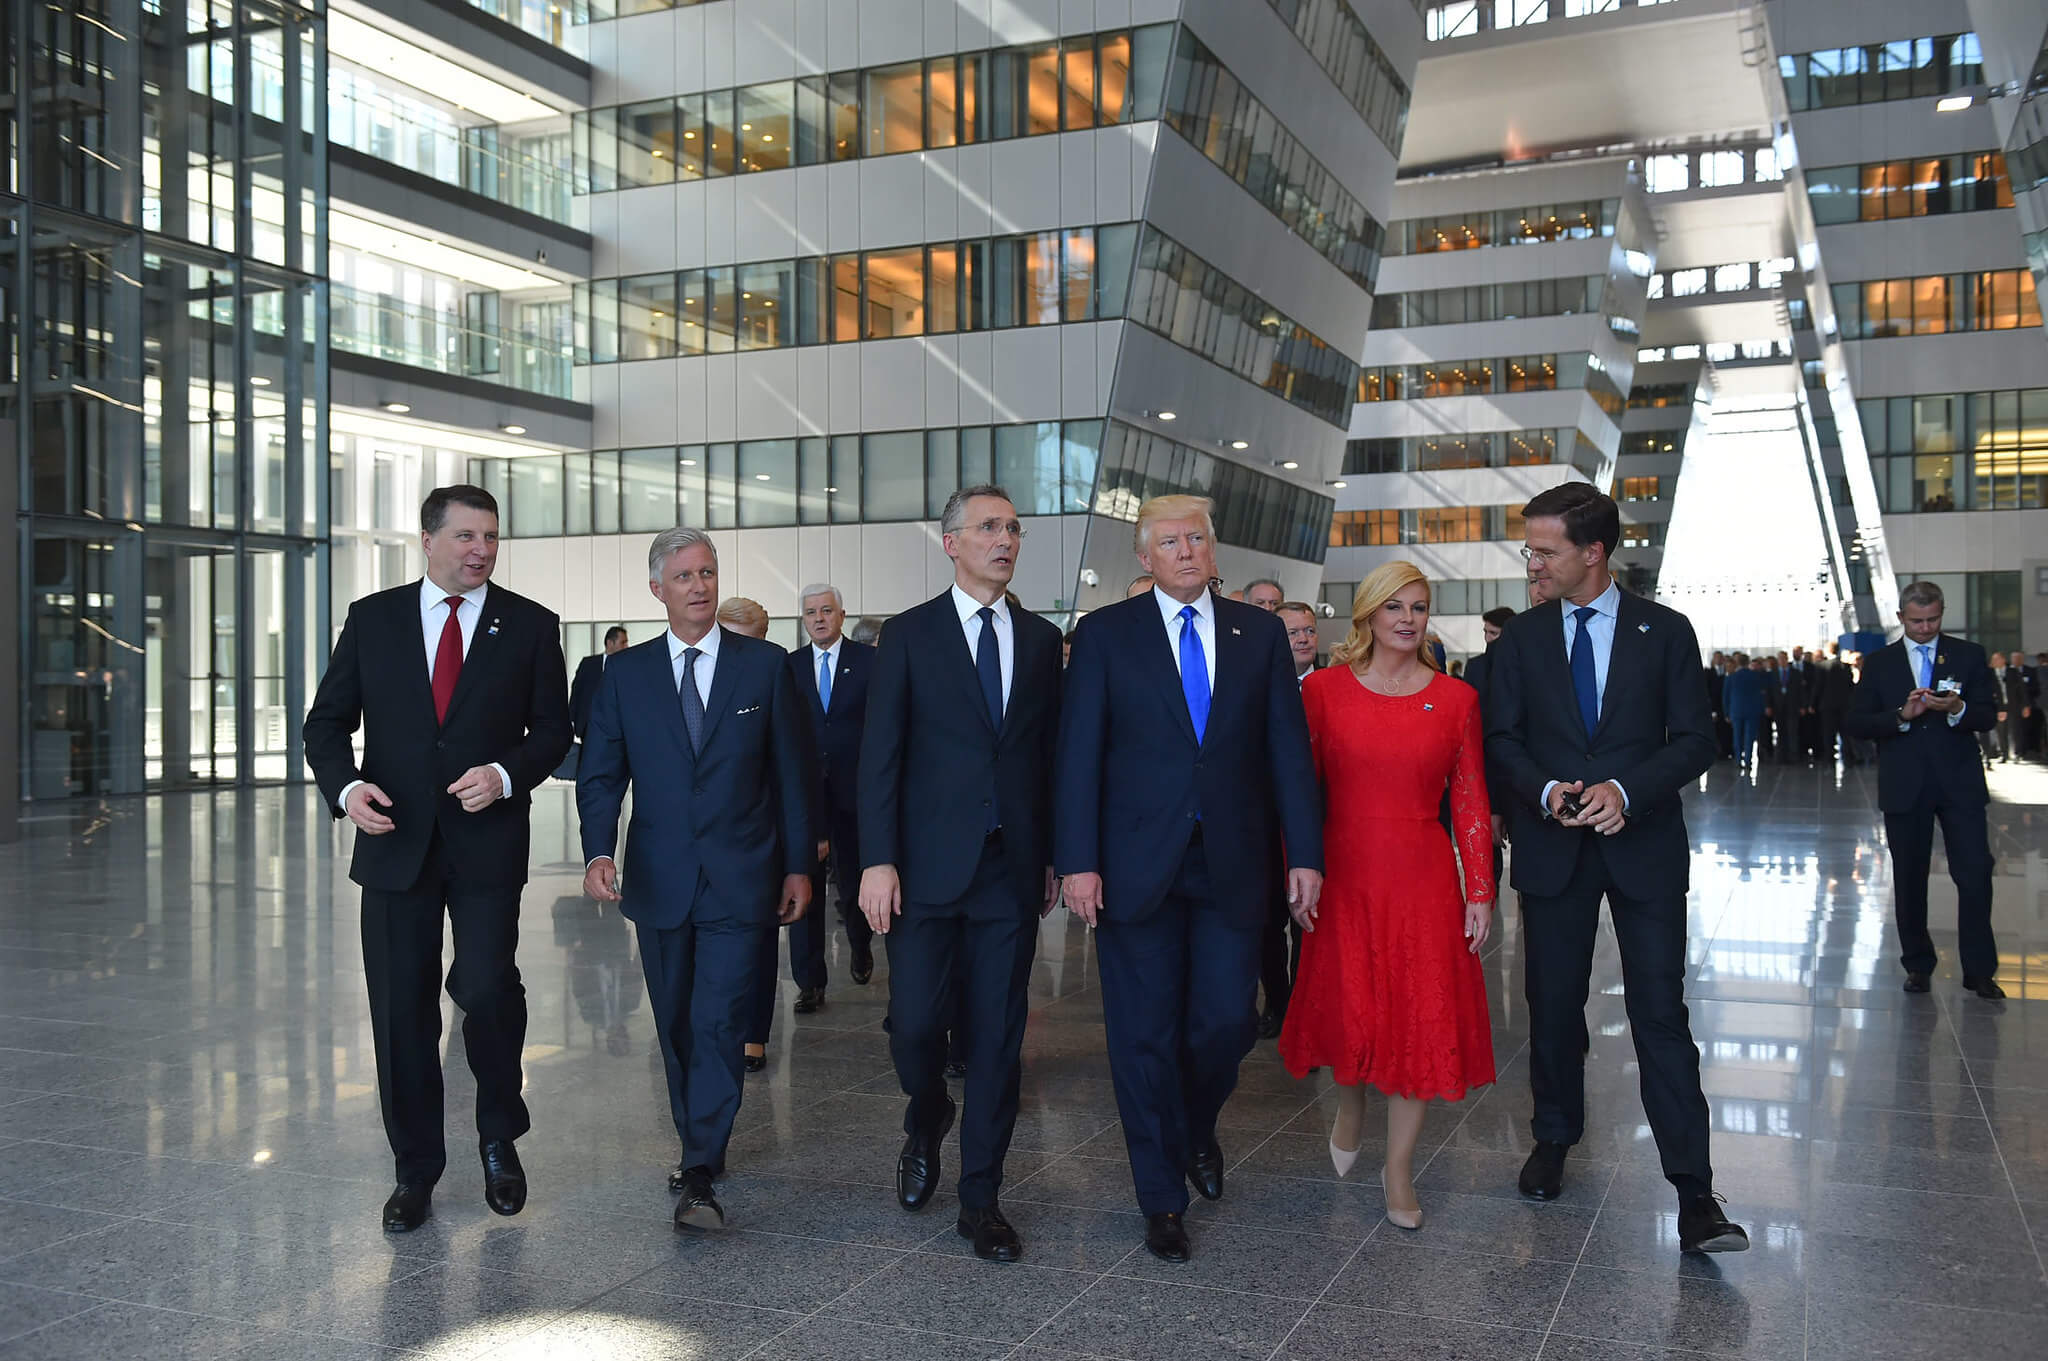 Boxhoorn-foto-Walk-Meeting of NATO Heads of State and Government in Brussels in 2017 with Dutch Prime Minister Mark Rutte on the right. NATO